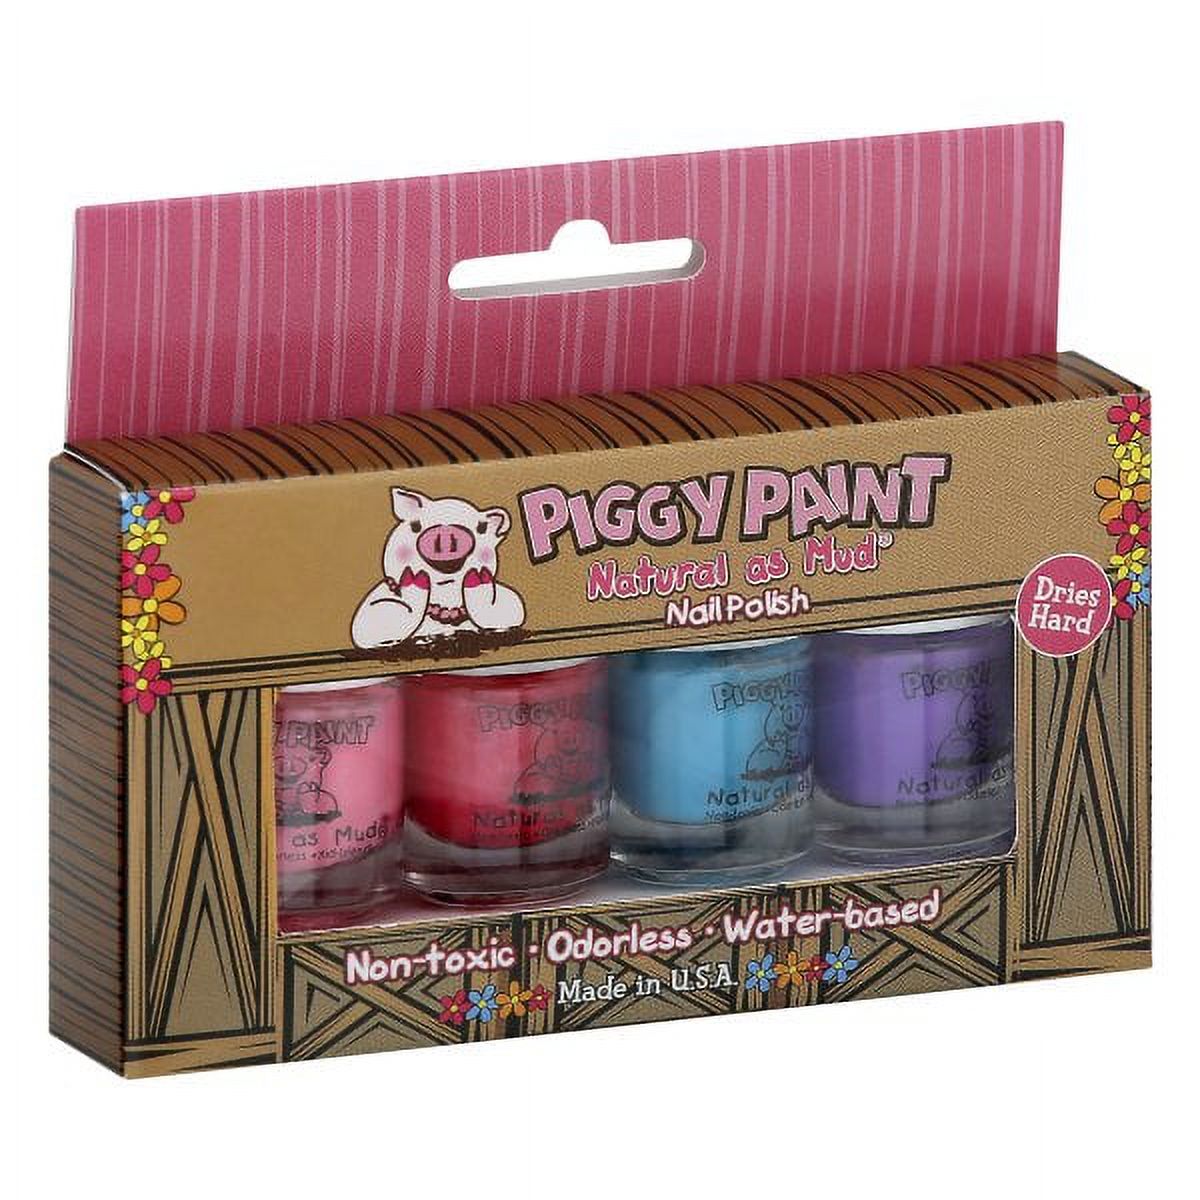 Piggy Paint Nail Polish- 4 Bottle Box- Non-toxicColors may vary from image based on Availbilty) - image 1 of 2